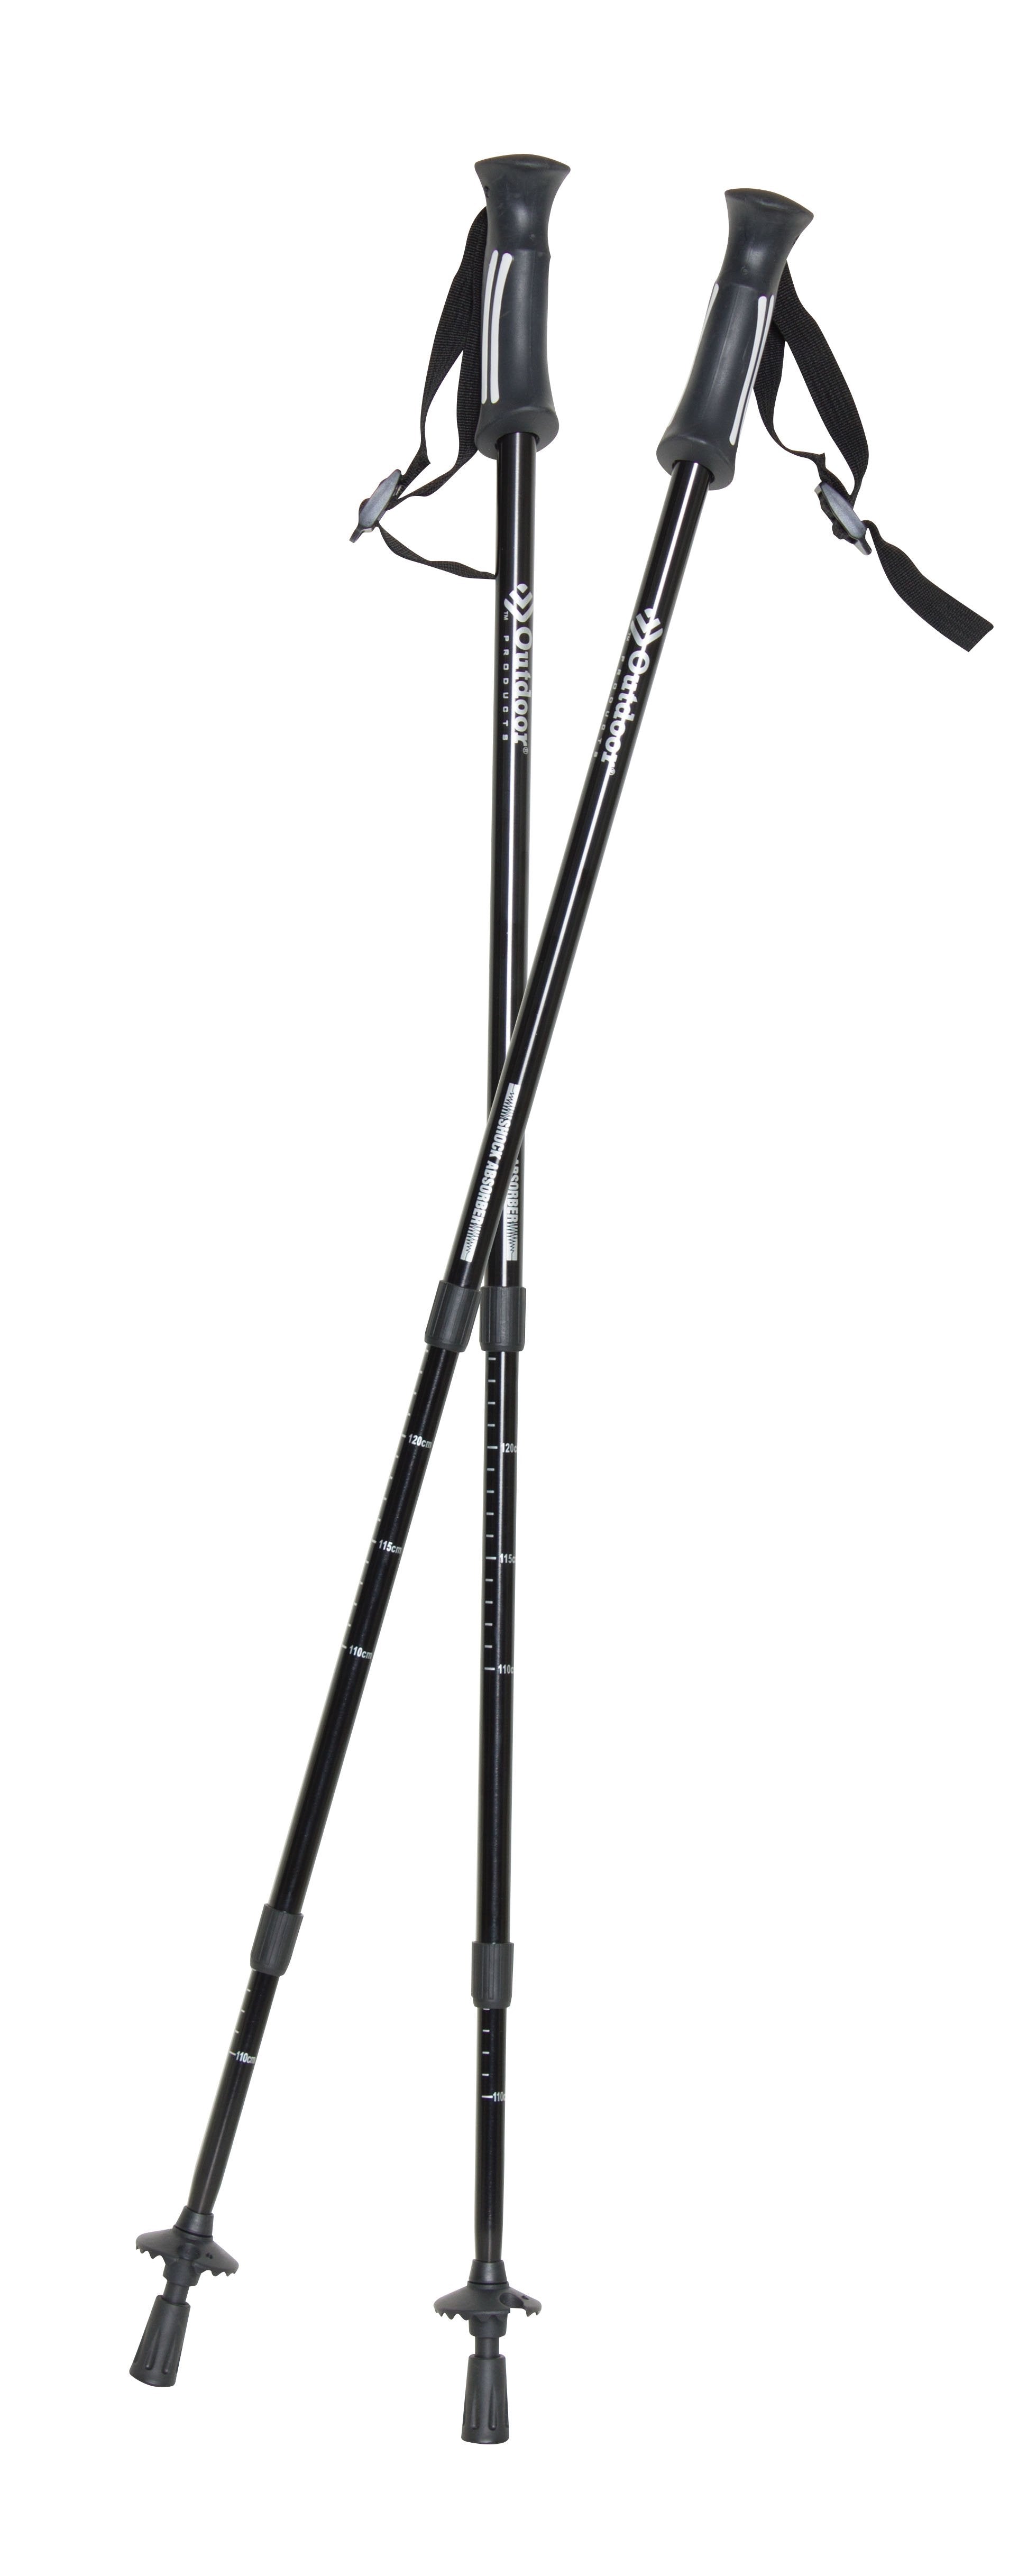 Apex Trekking Pole Set – Outdoor Products